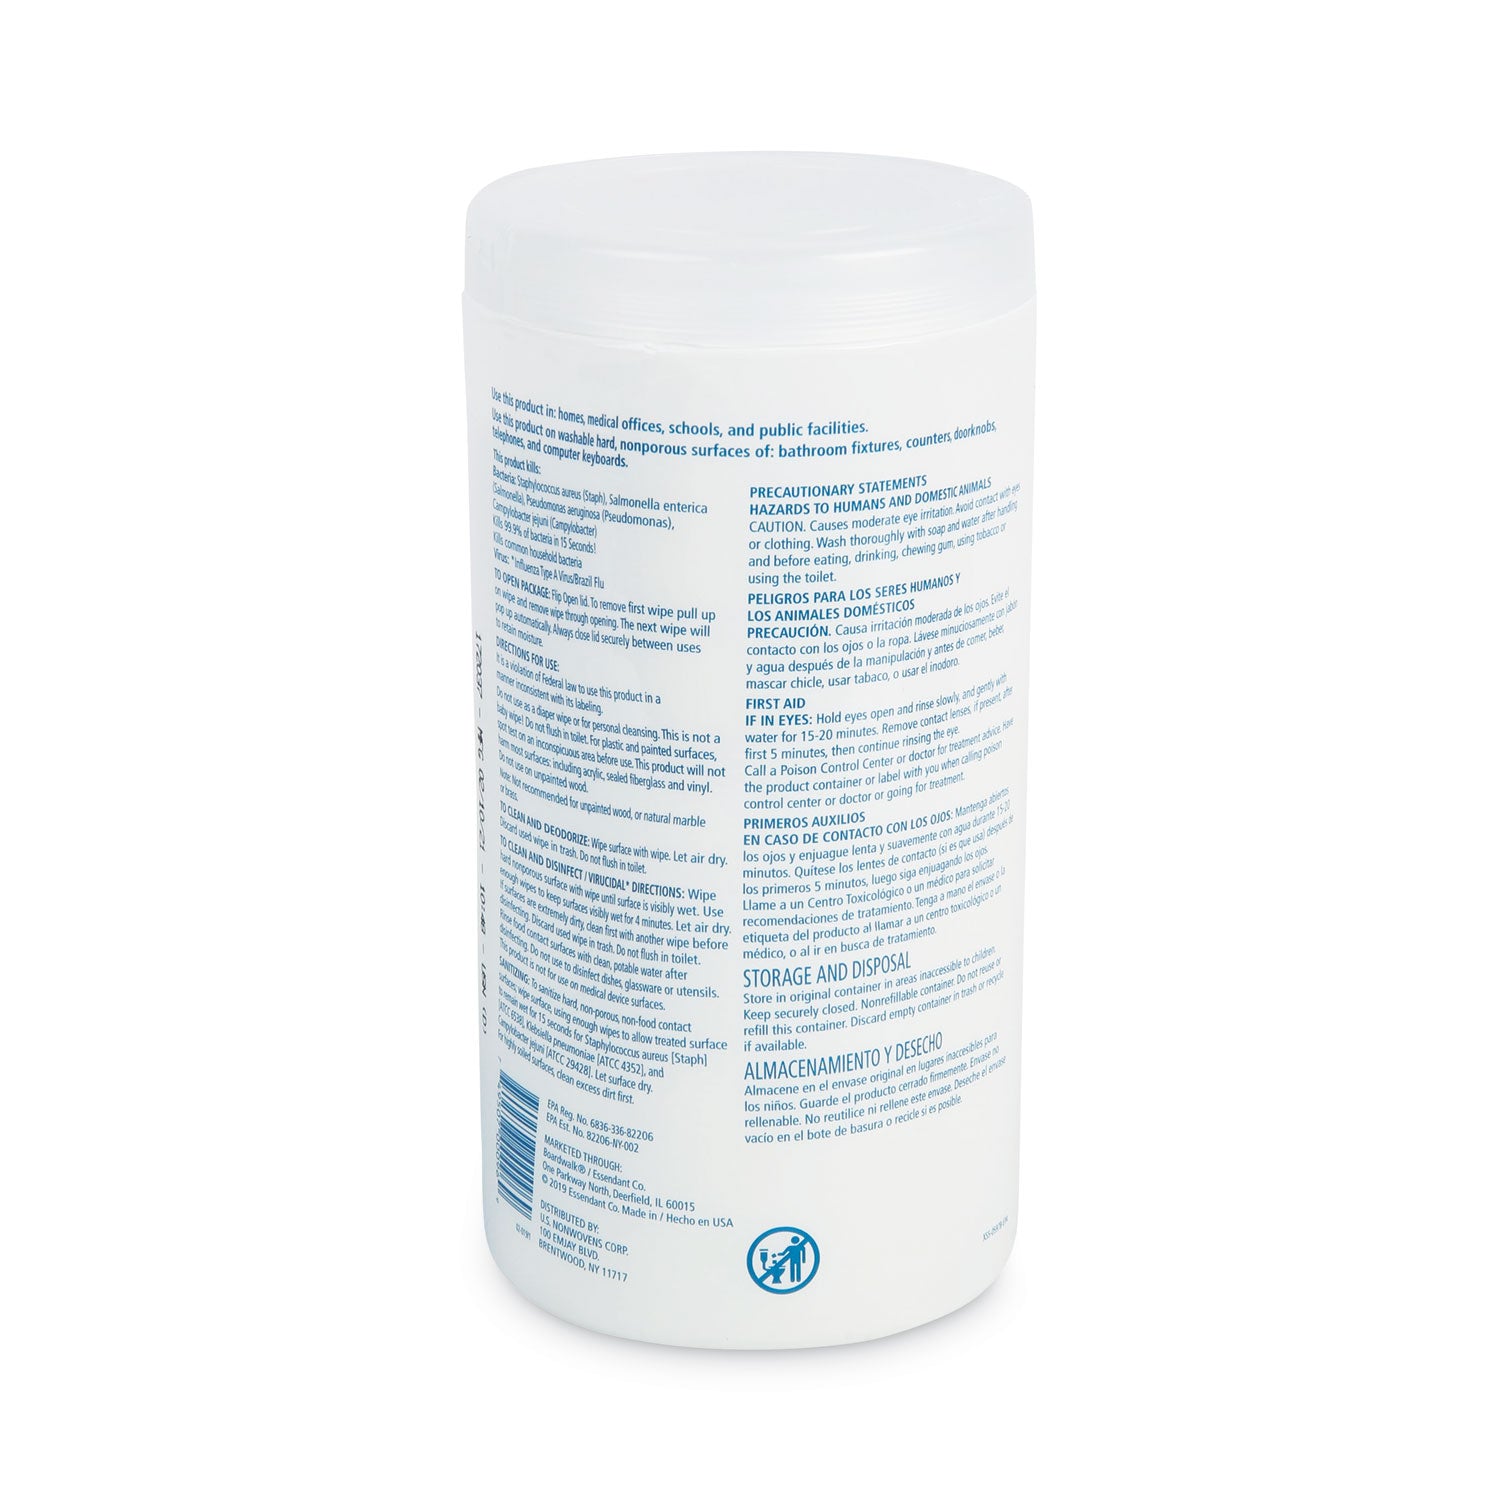 disinfecting-wipes-7-x-8-lemon-scent-75-canister-6-canisters-carton_bwk455w75 - 3